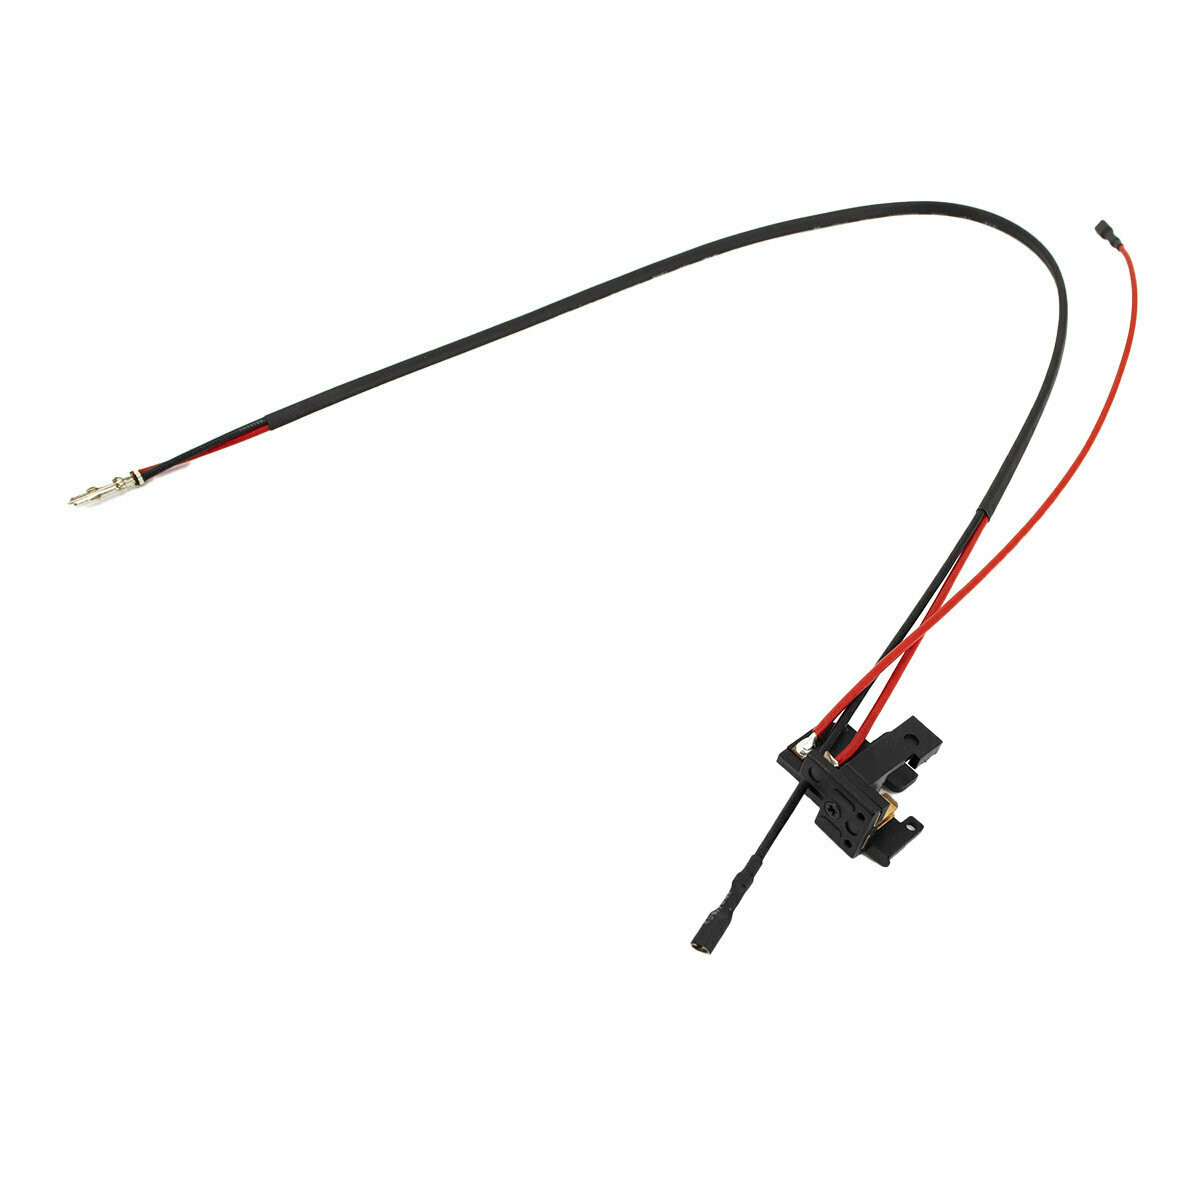 Valken Rear Wiring and Trigger Switch Assembly for Ver. 2 Airsoft AEGs